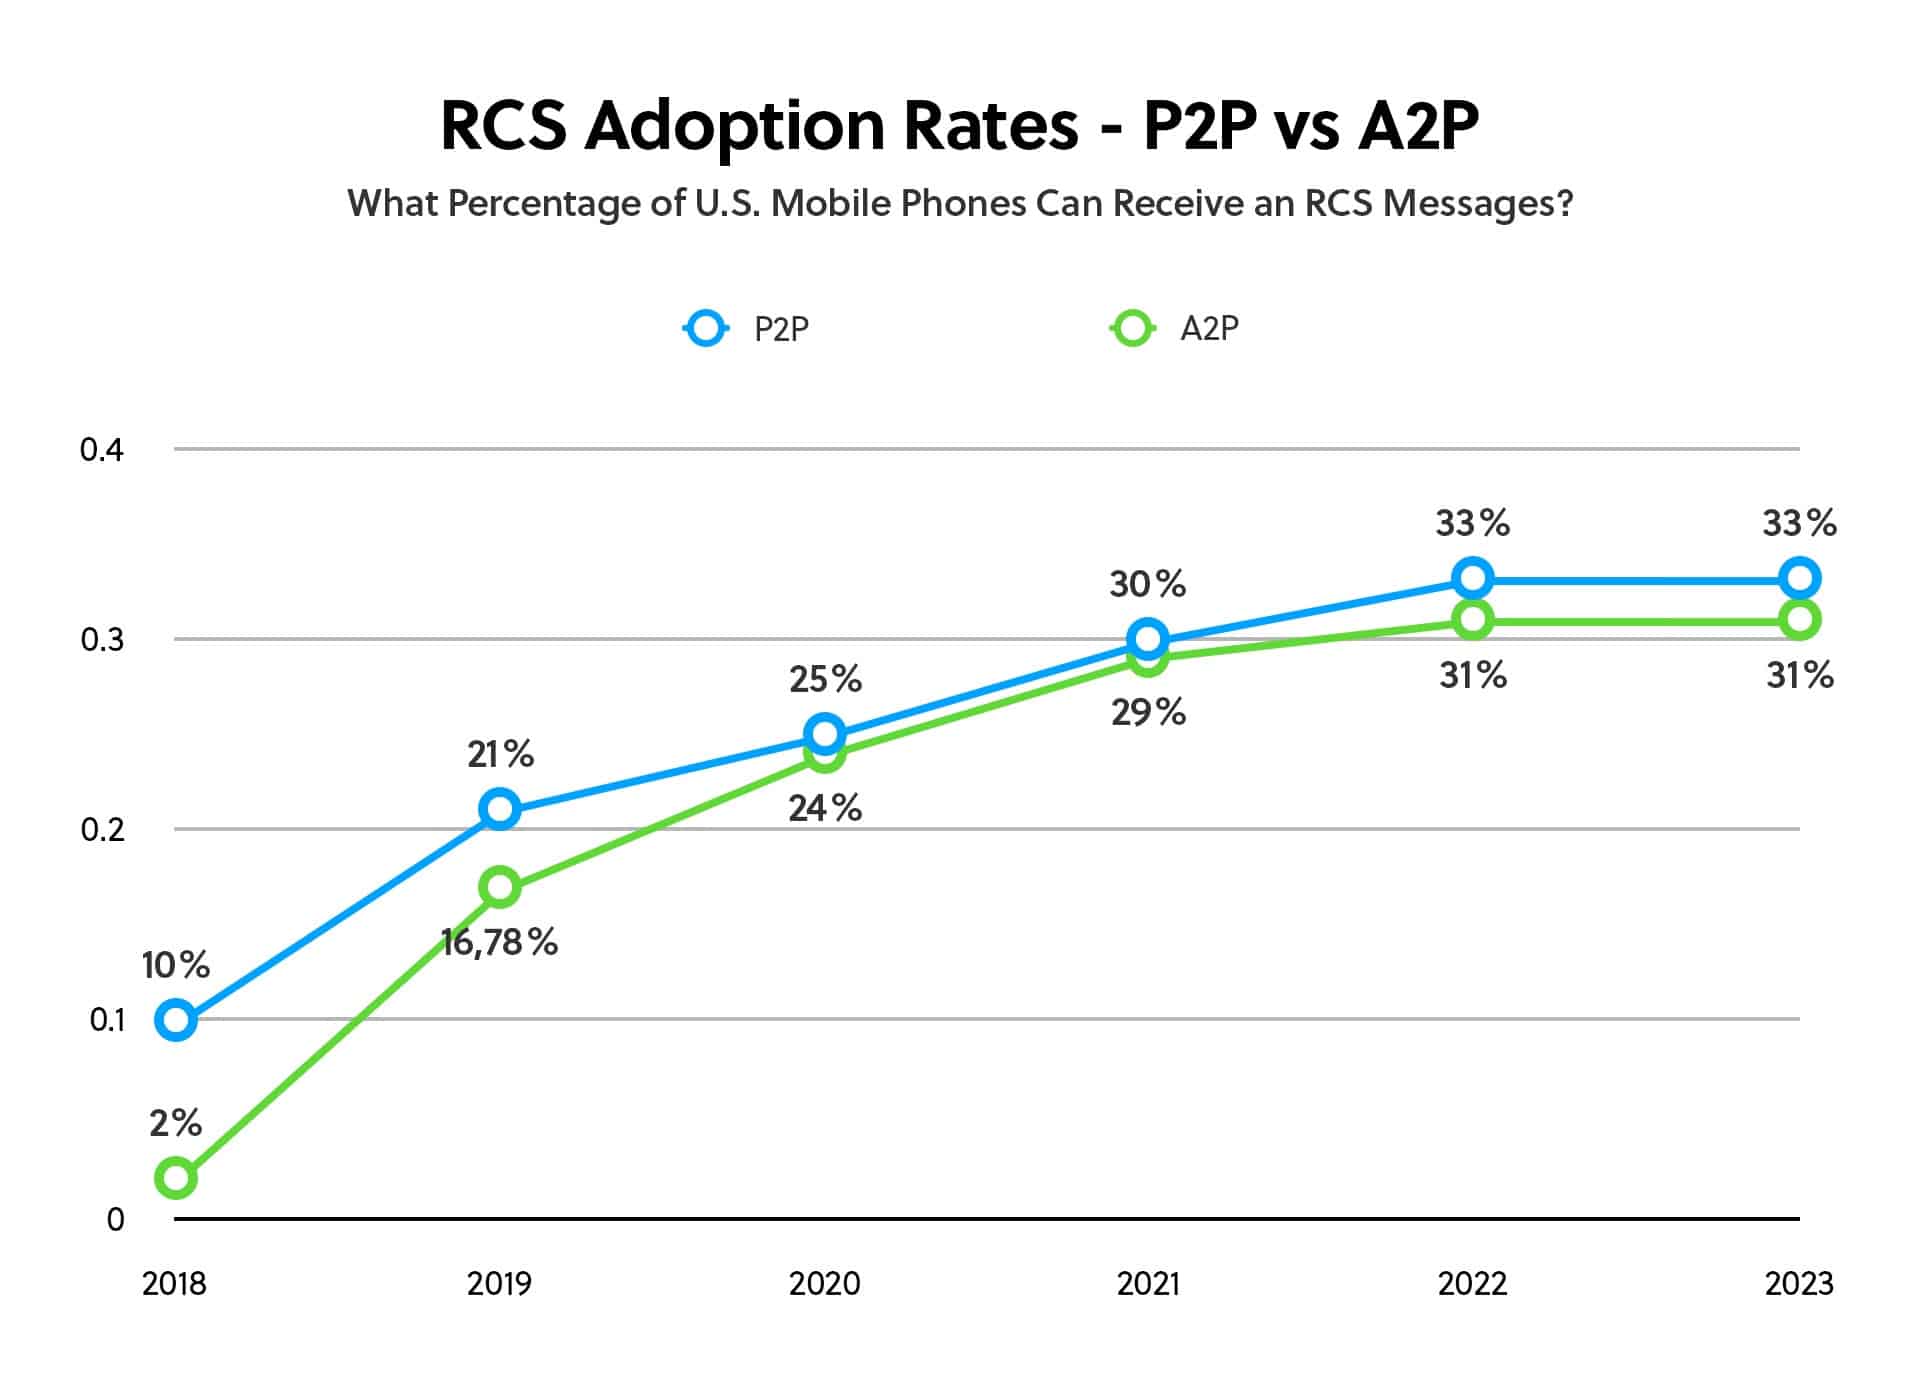 This graphic shows two lines that represent the projected U.S. RCS adoption rates for P2P messaging and A2P messaging from 2018 until 2023.